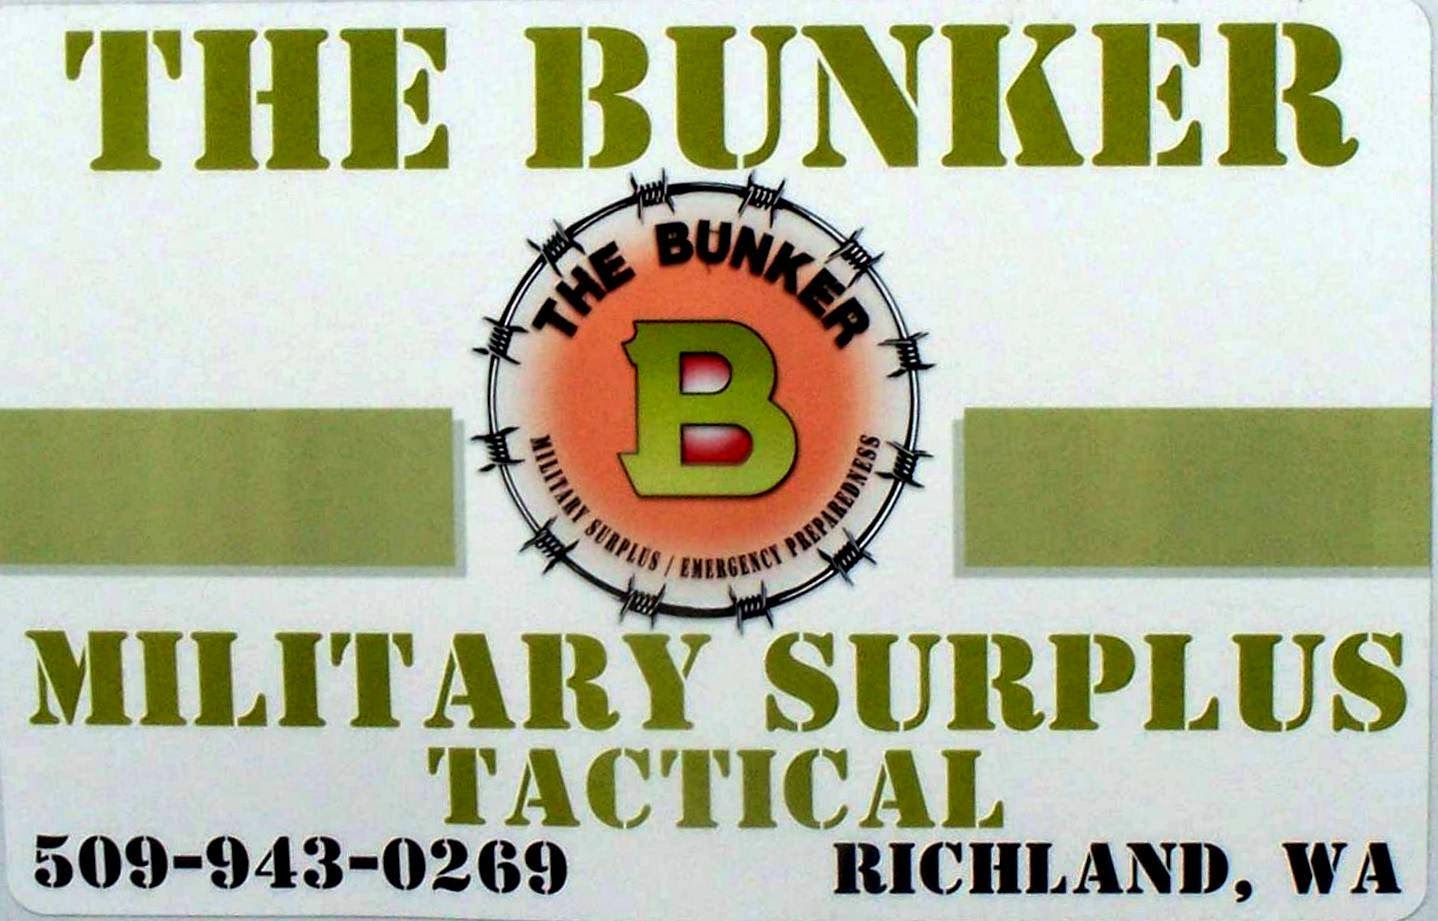 https://www.facebook.com/pages/The-Bunker/259055134177411